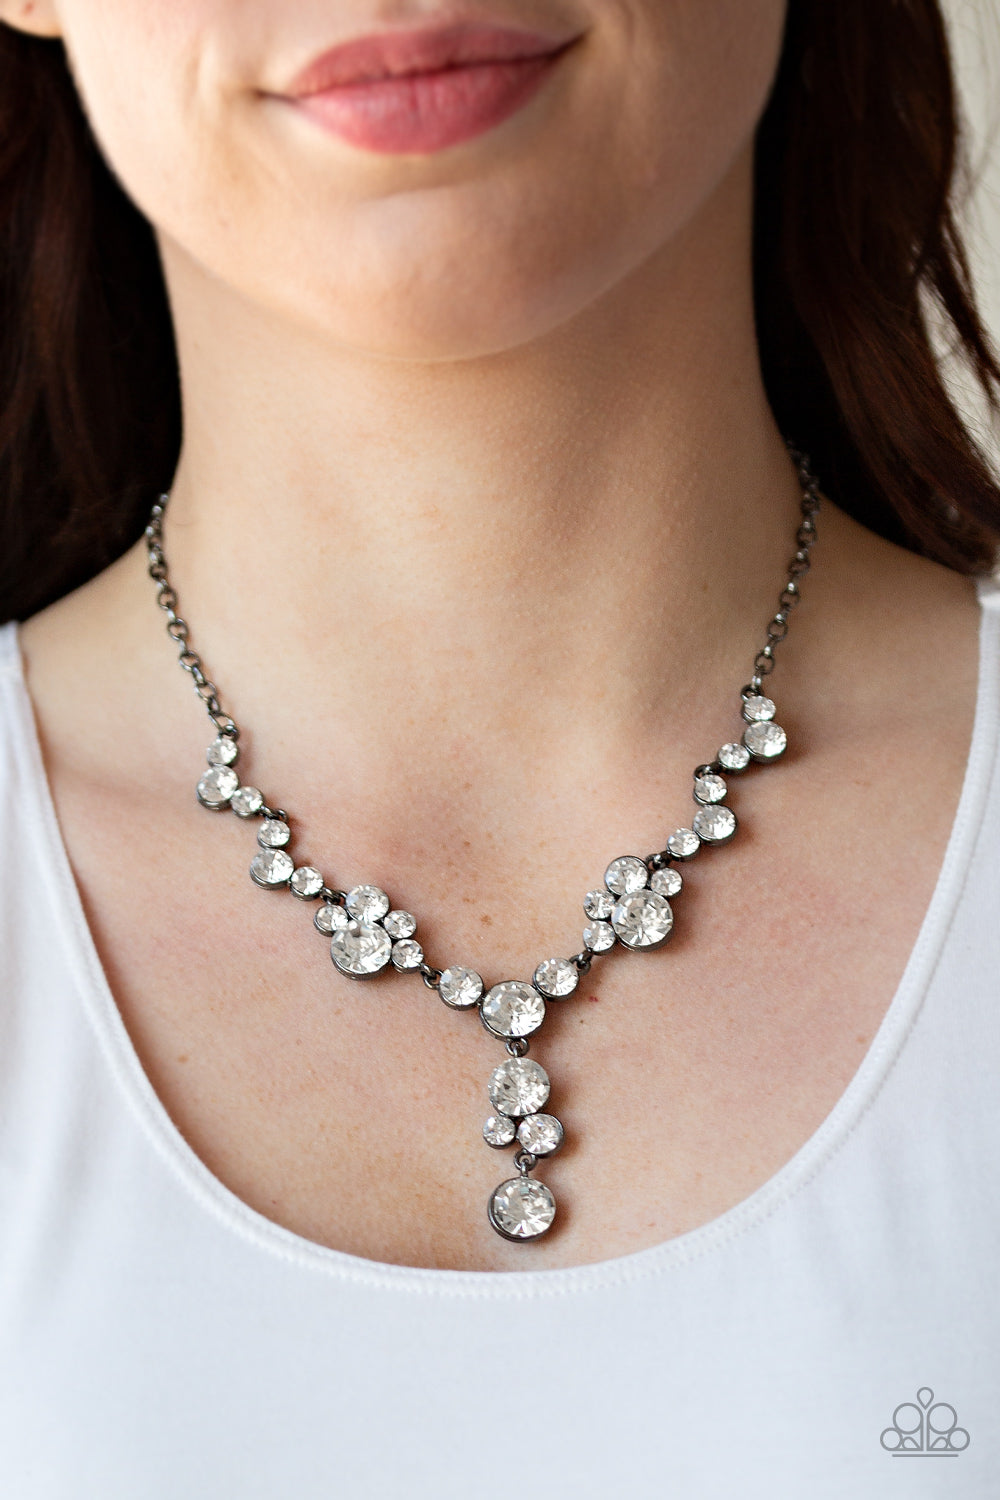 Paparazzi Jewelry & Accessories - Inner Light - Black Necklace. Bling By Titia Boutique